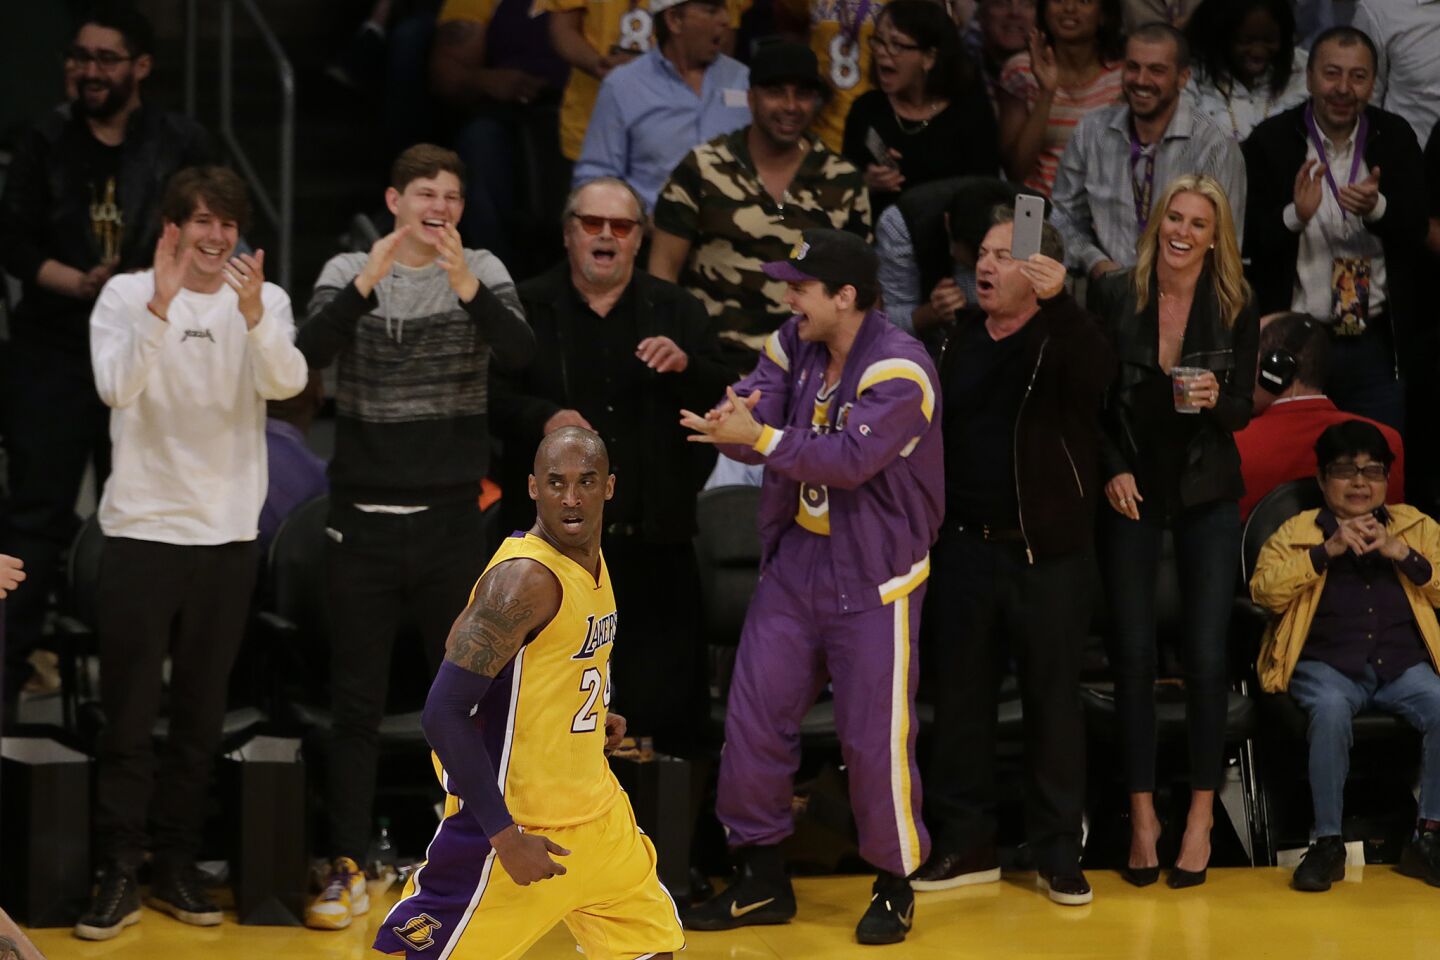 Front row fans, including Jack Nicholson cheer Kobe Bryant after he hits a shot during first half action against the Jazz at Staples Center.